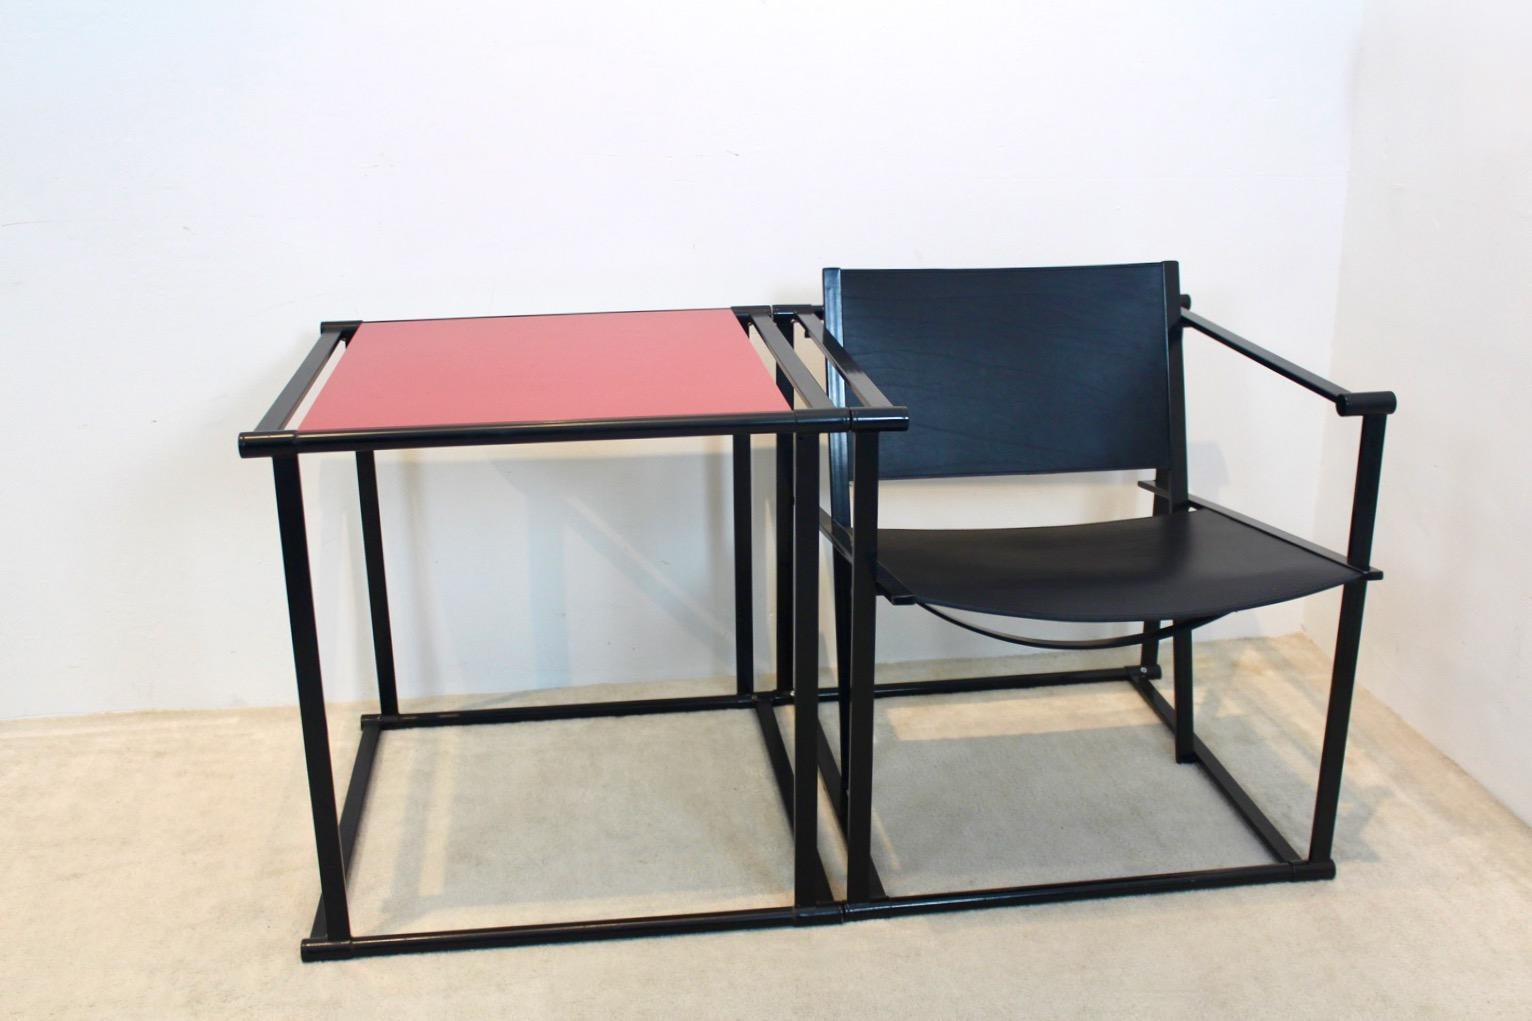 FM62 Cubic chair designed by Radboud van Beekum for Pastoe the Netherlands in the 1980s. The Chair comes with a black lacquered square metal frame with the back and seat in strong black Saddle Leather, very good. The Cubic Table comes with a black